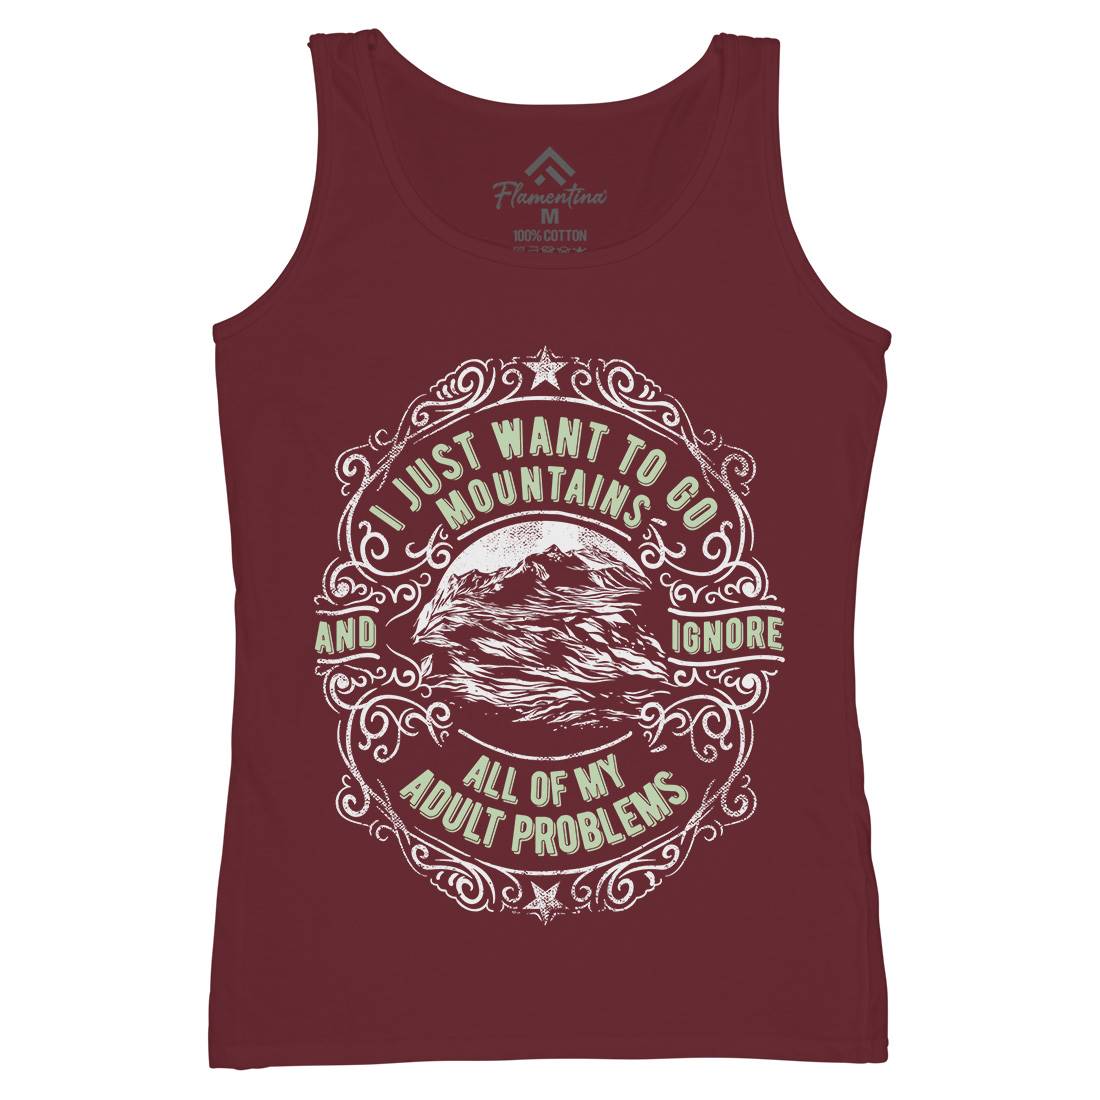 I Want To Go Mountains Womens Organic Tank Top Vest Nature C948